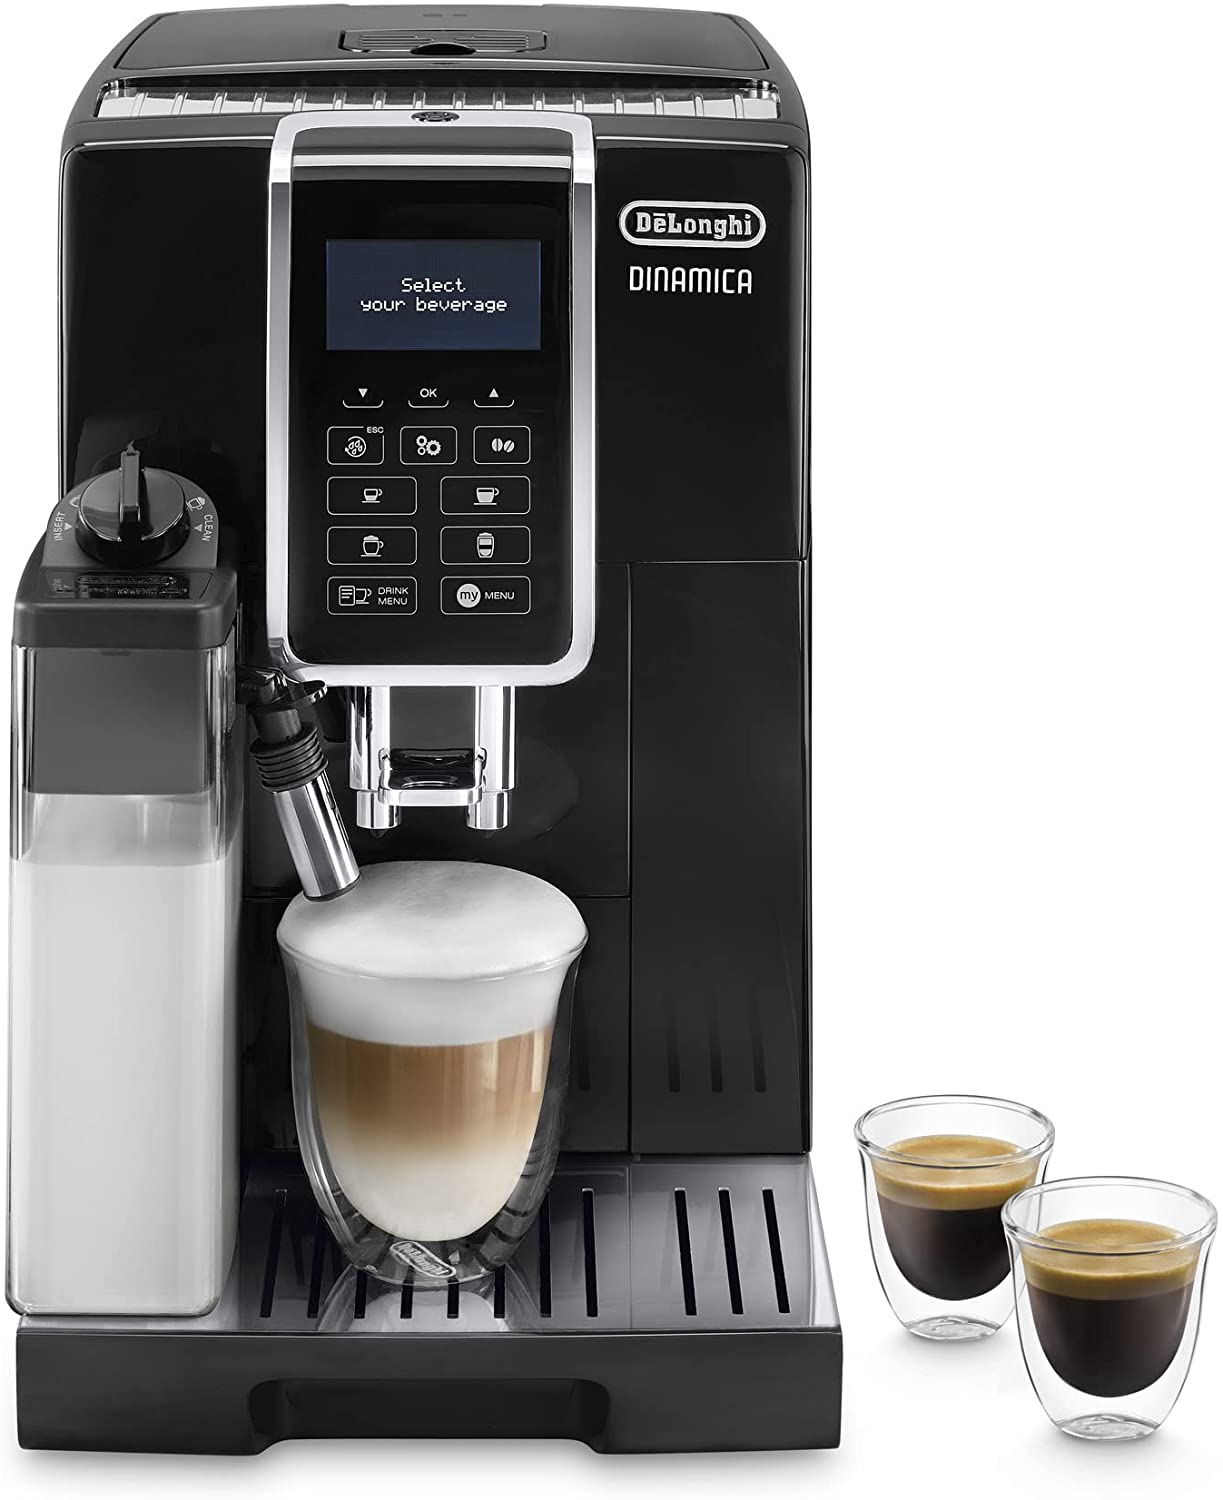 DeLonghi De\'Longhi Dinamica ECAM 350.50.B Fully Automatic Coffee Machine with LatteCrema Milk System for Cappuccino, Espresso and Coffee at the Touch of a Button, 2-Cup Function, Large 1.8 litre Water Tank, Black